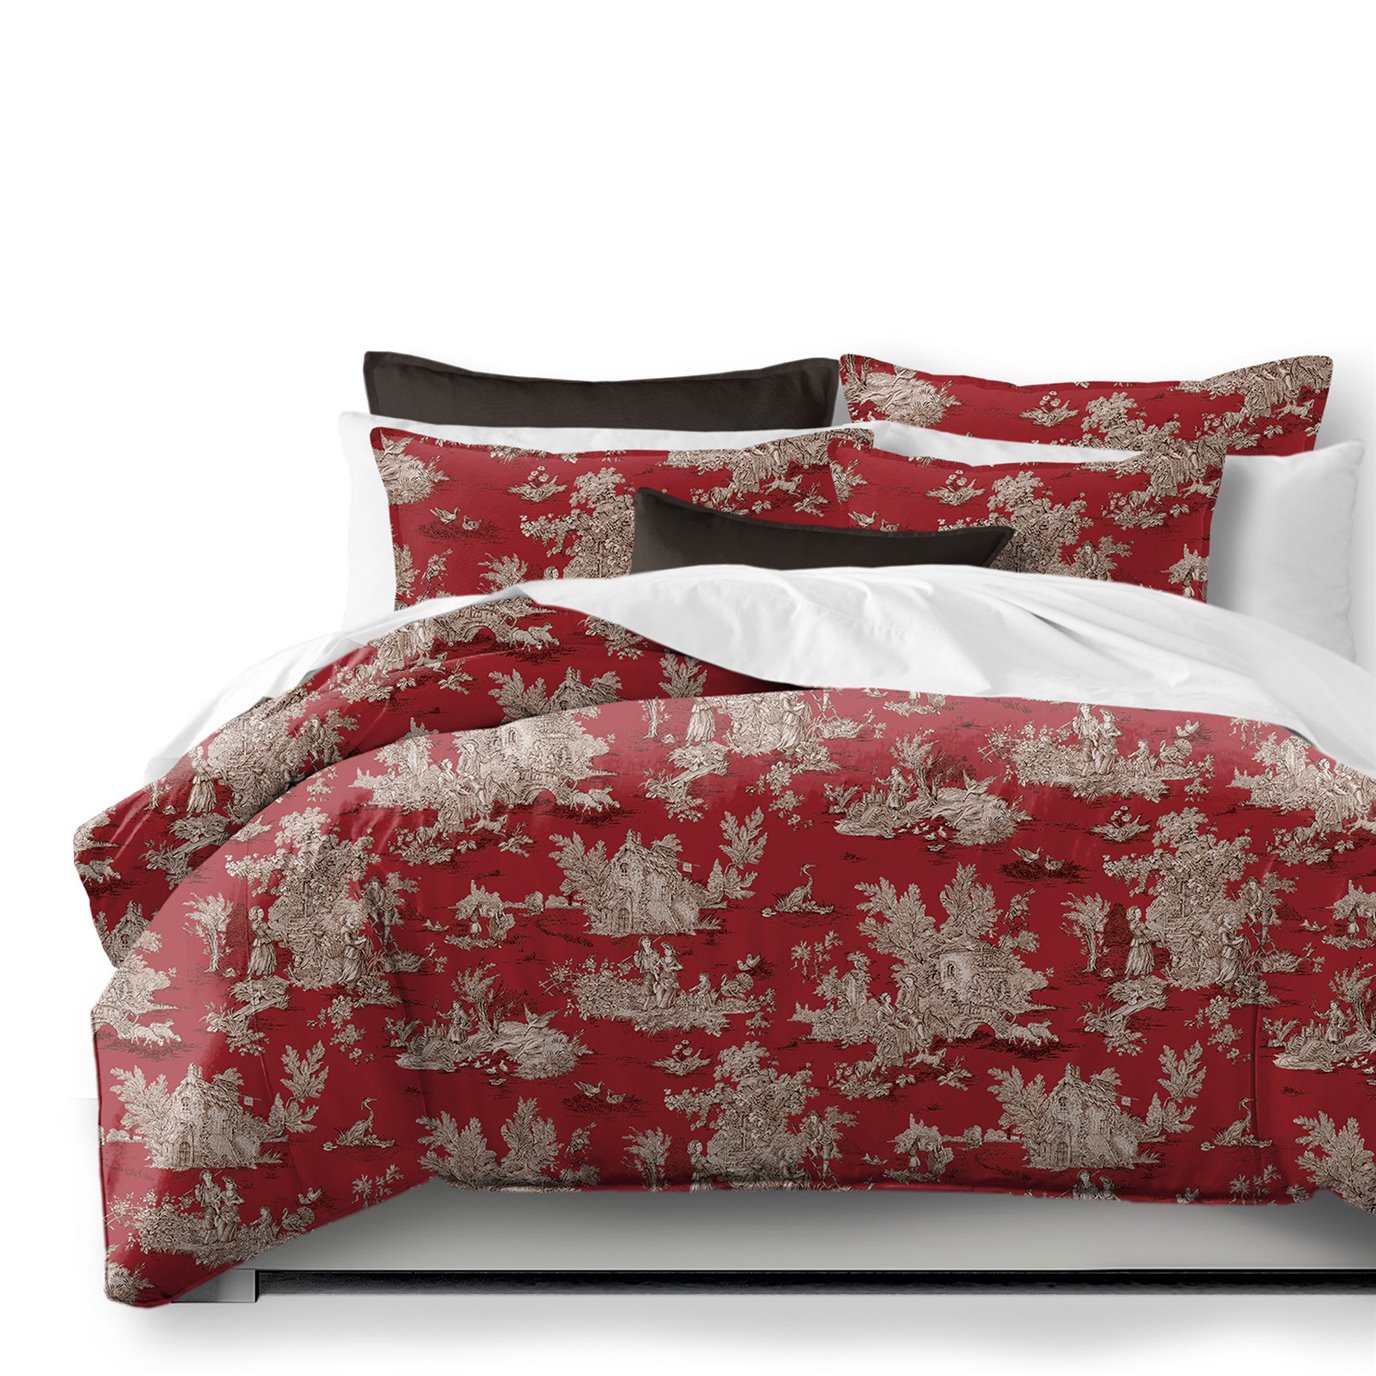 Chateau Red/Black Coverlet and Pillow Sham(s) Set - Size King / California King